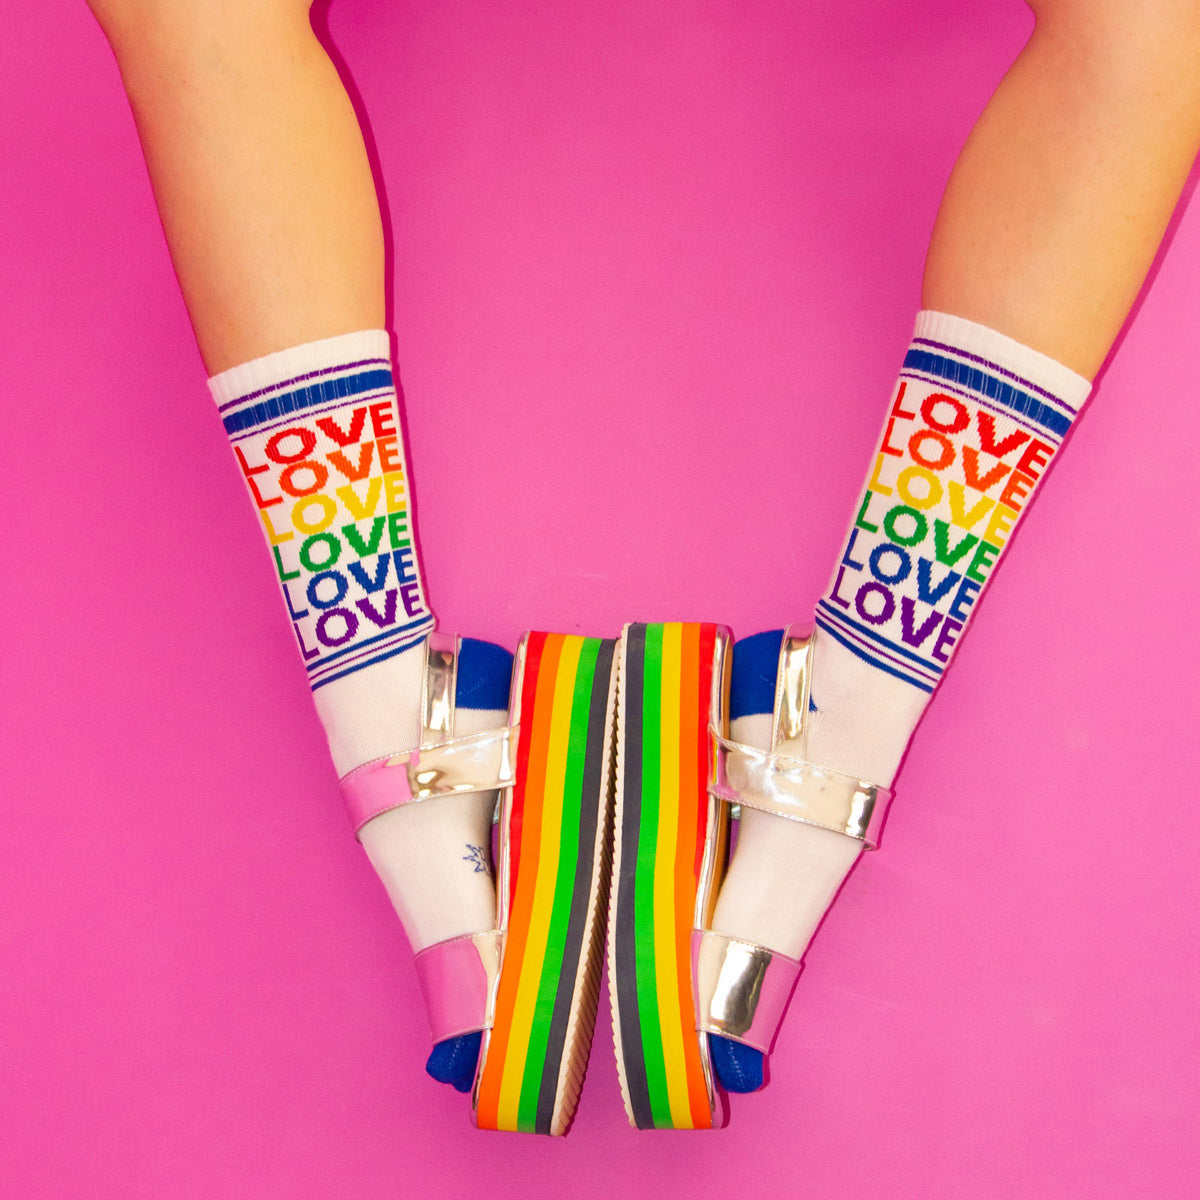 Metallic silver sandals pair with rainbow socks that say "LOVE"